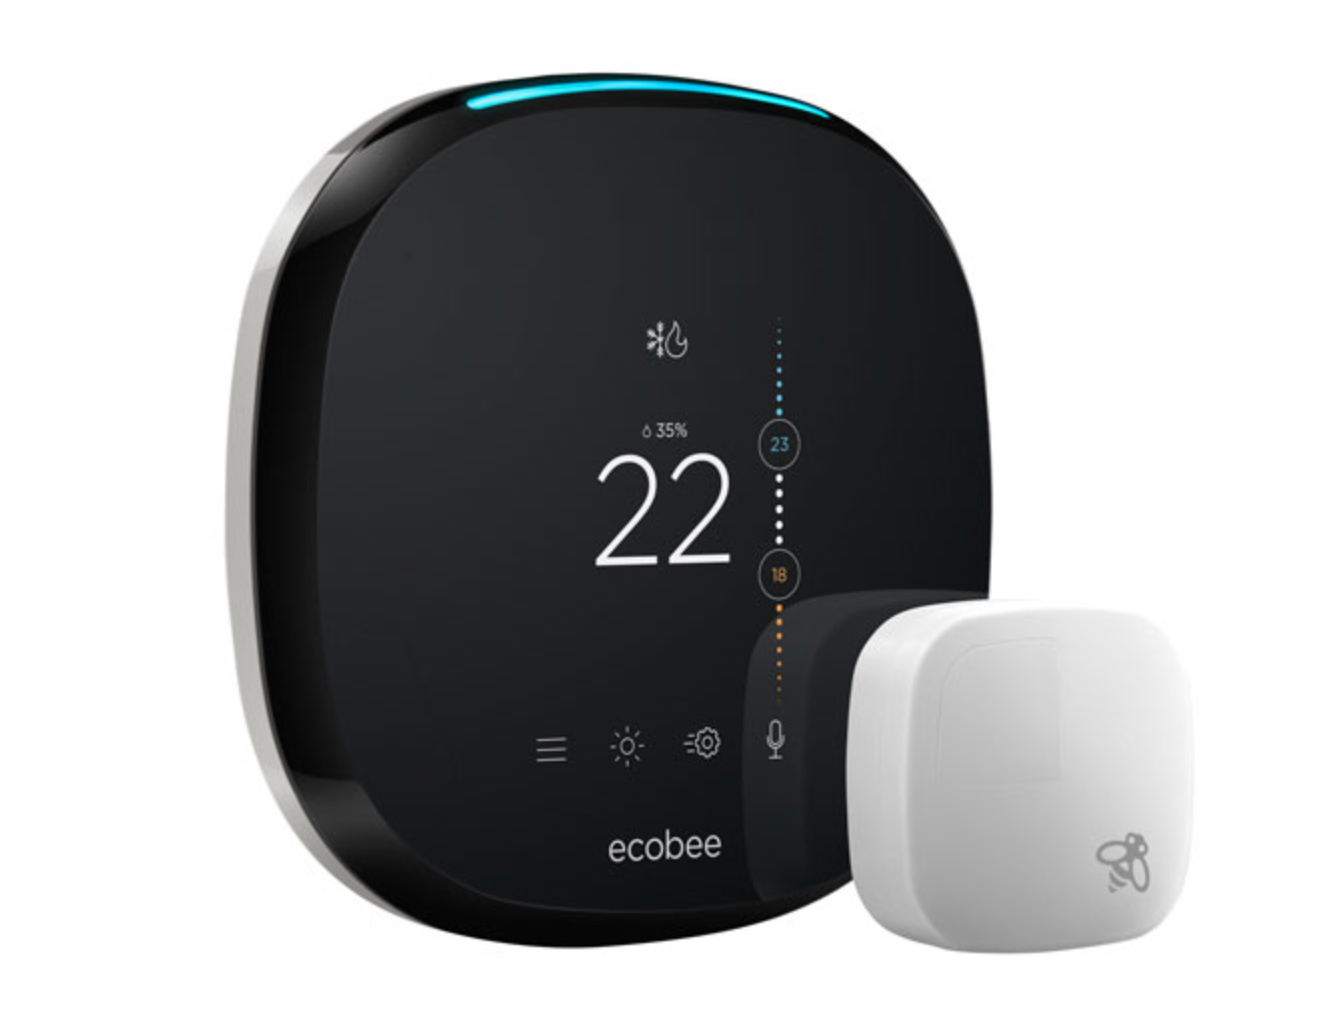 moving day - ecobee smart thermostat